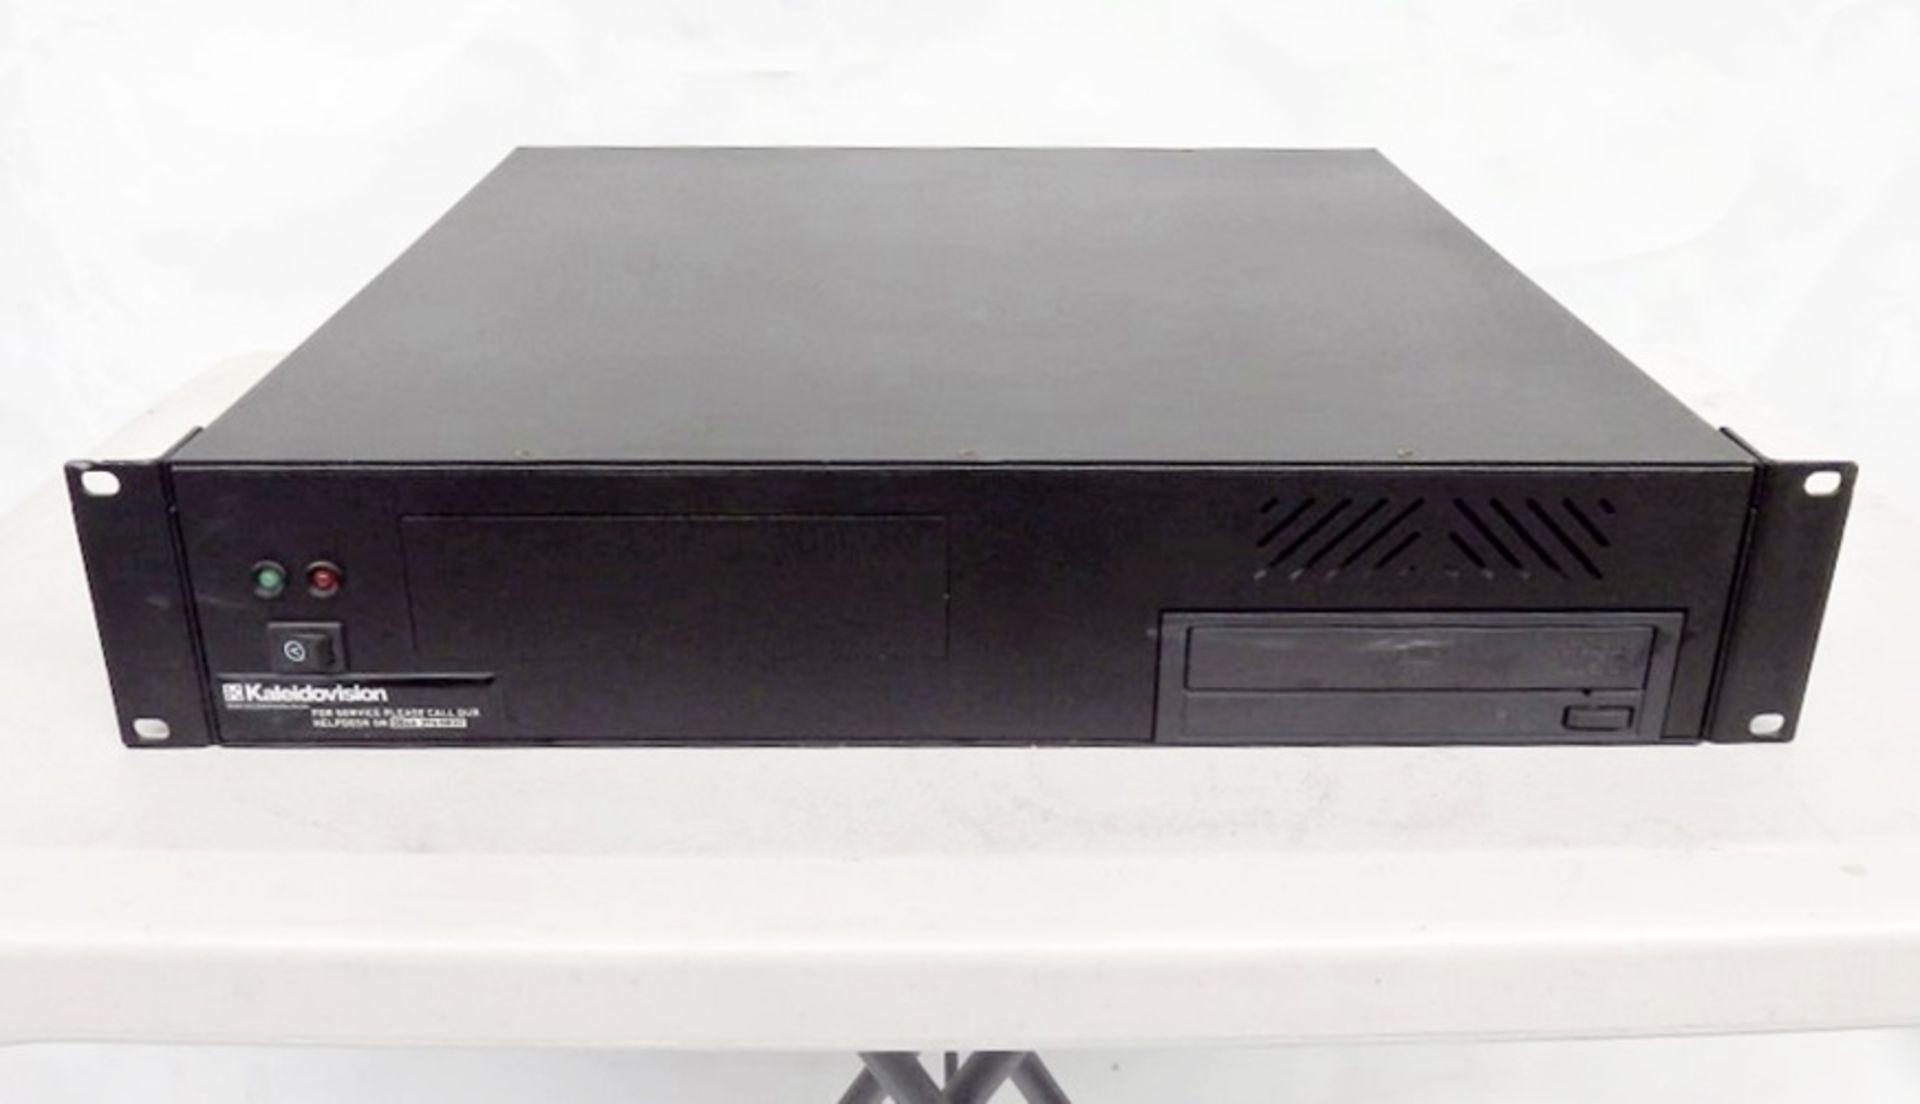 1 x Kaleidovision Commercial Music Video Player With 320gb HDD - Model: KL4-M - Recently Removed